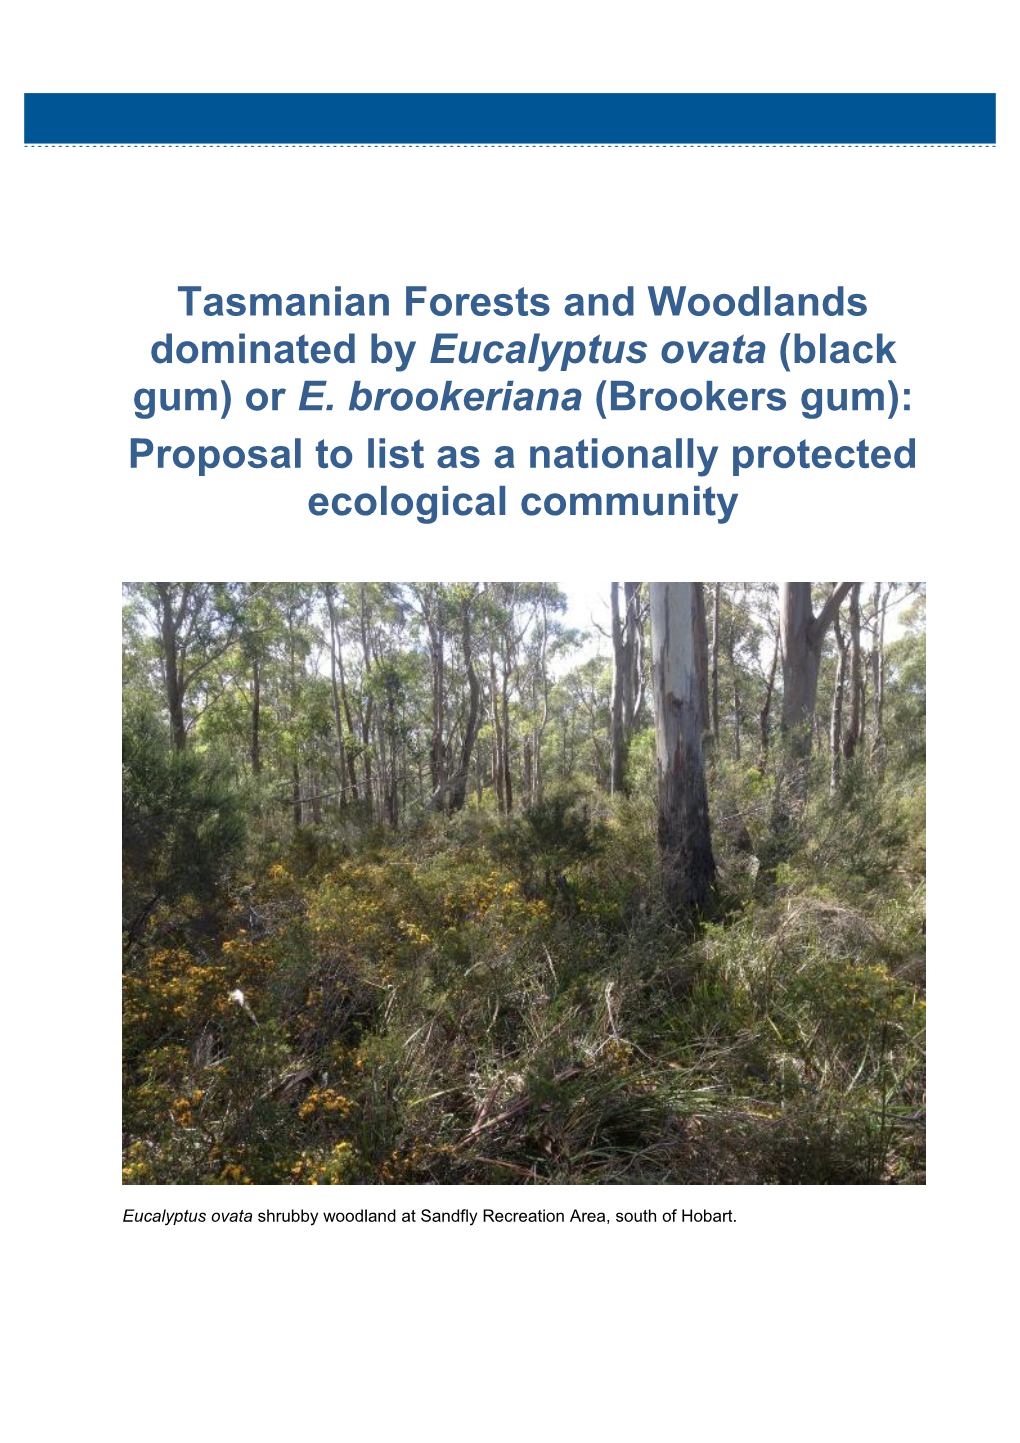 Tasmanian Forests and Woodlands Dominated by Eucalyptus Ovata (Black Gum) Or E. Brookeriana